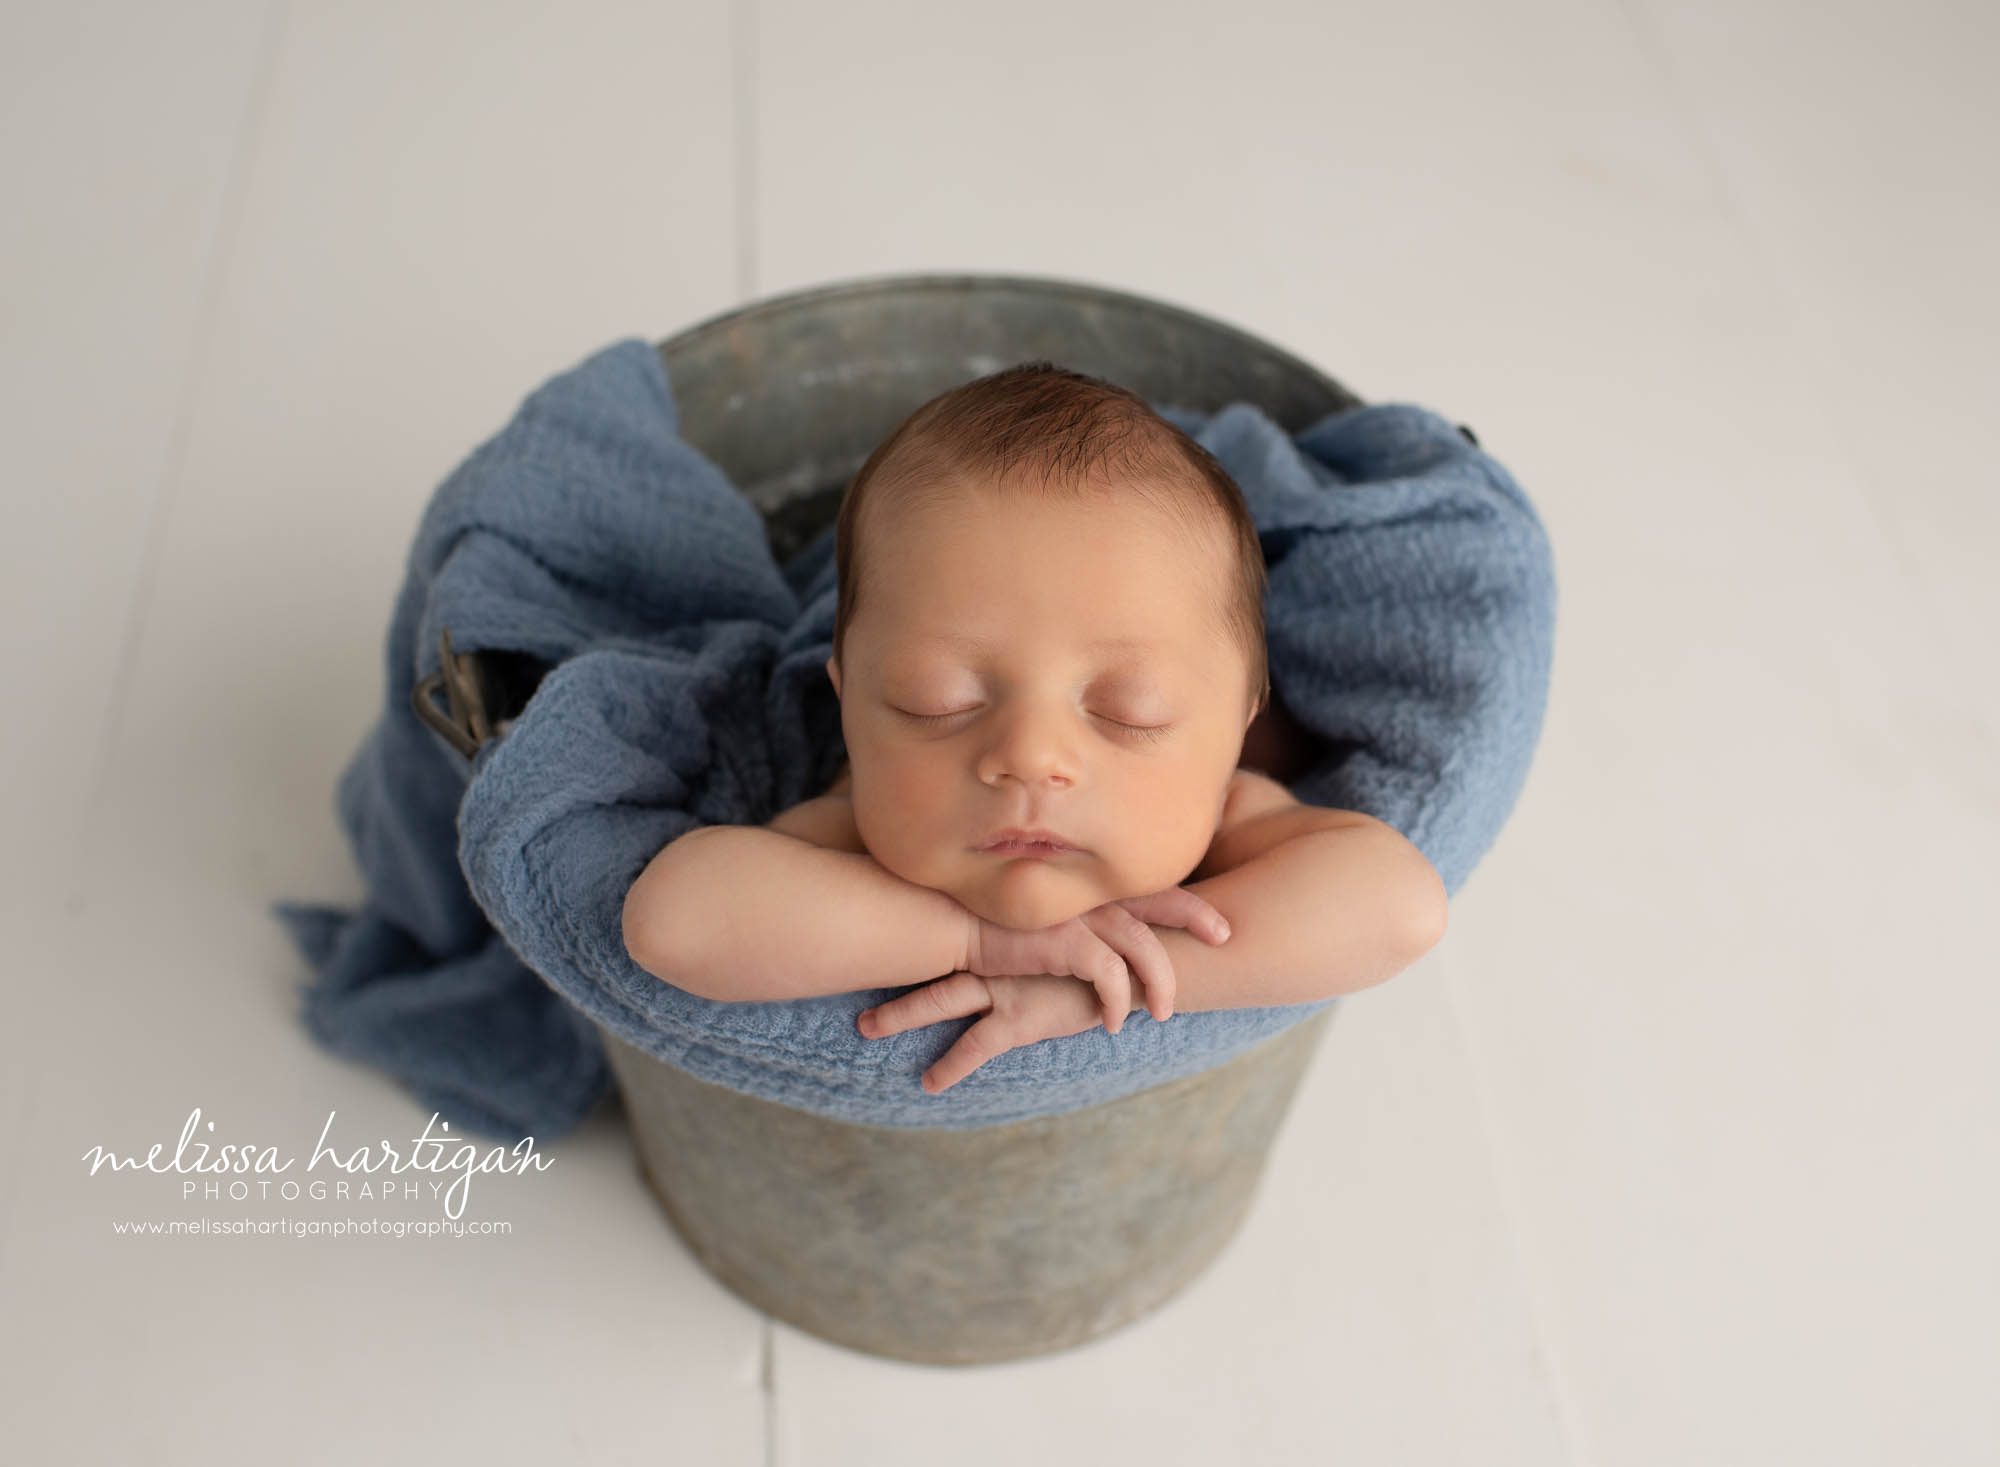 Baby boy posed in bucket with blue wrap draped CT newborn photographer